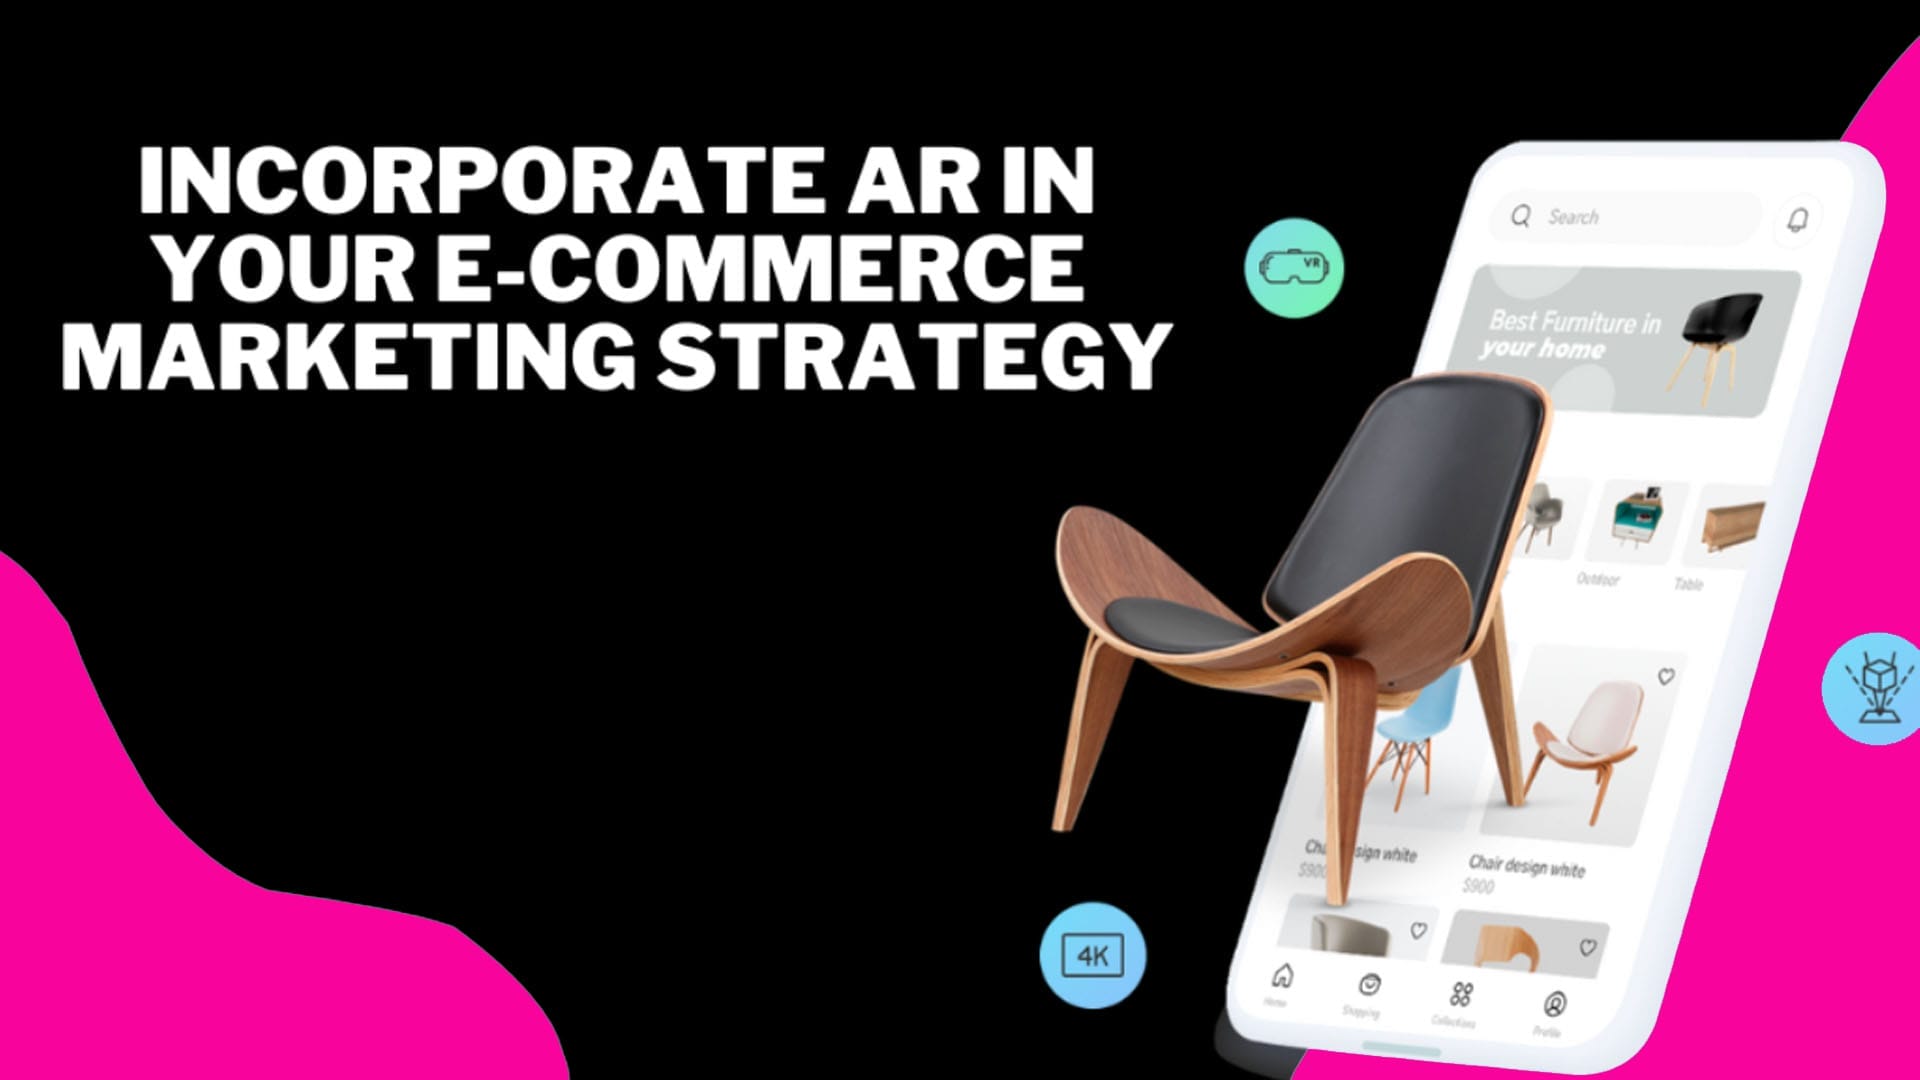 Ways to Incorporate AR in Your E-commerce Marketing Strategy